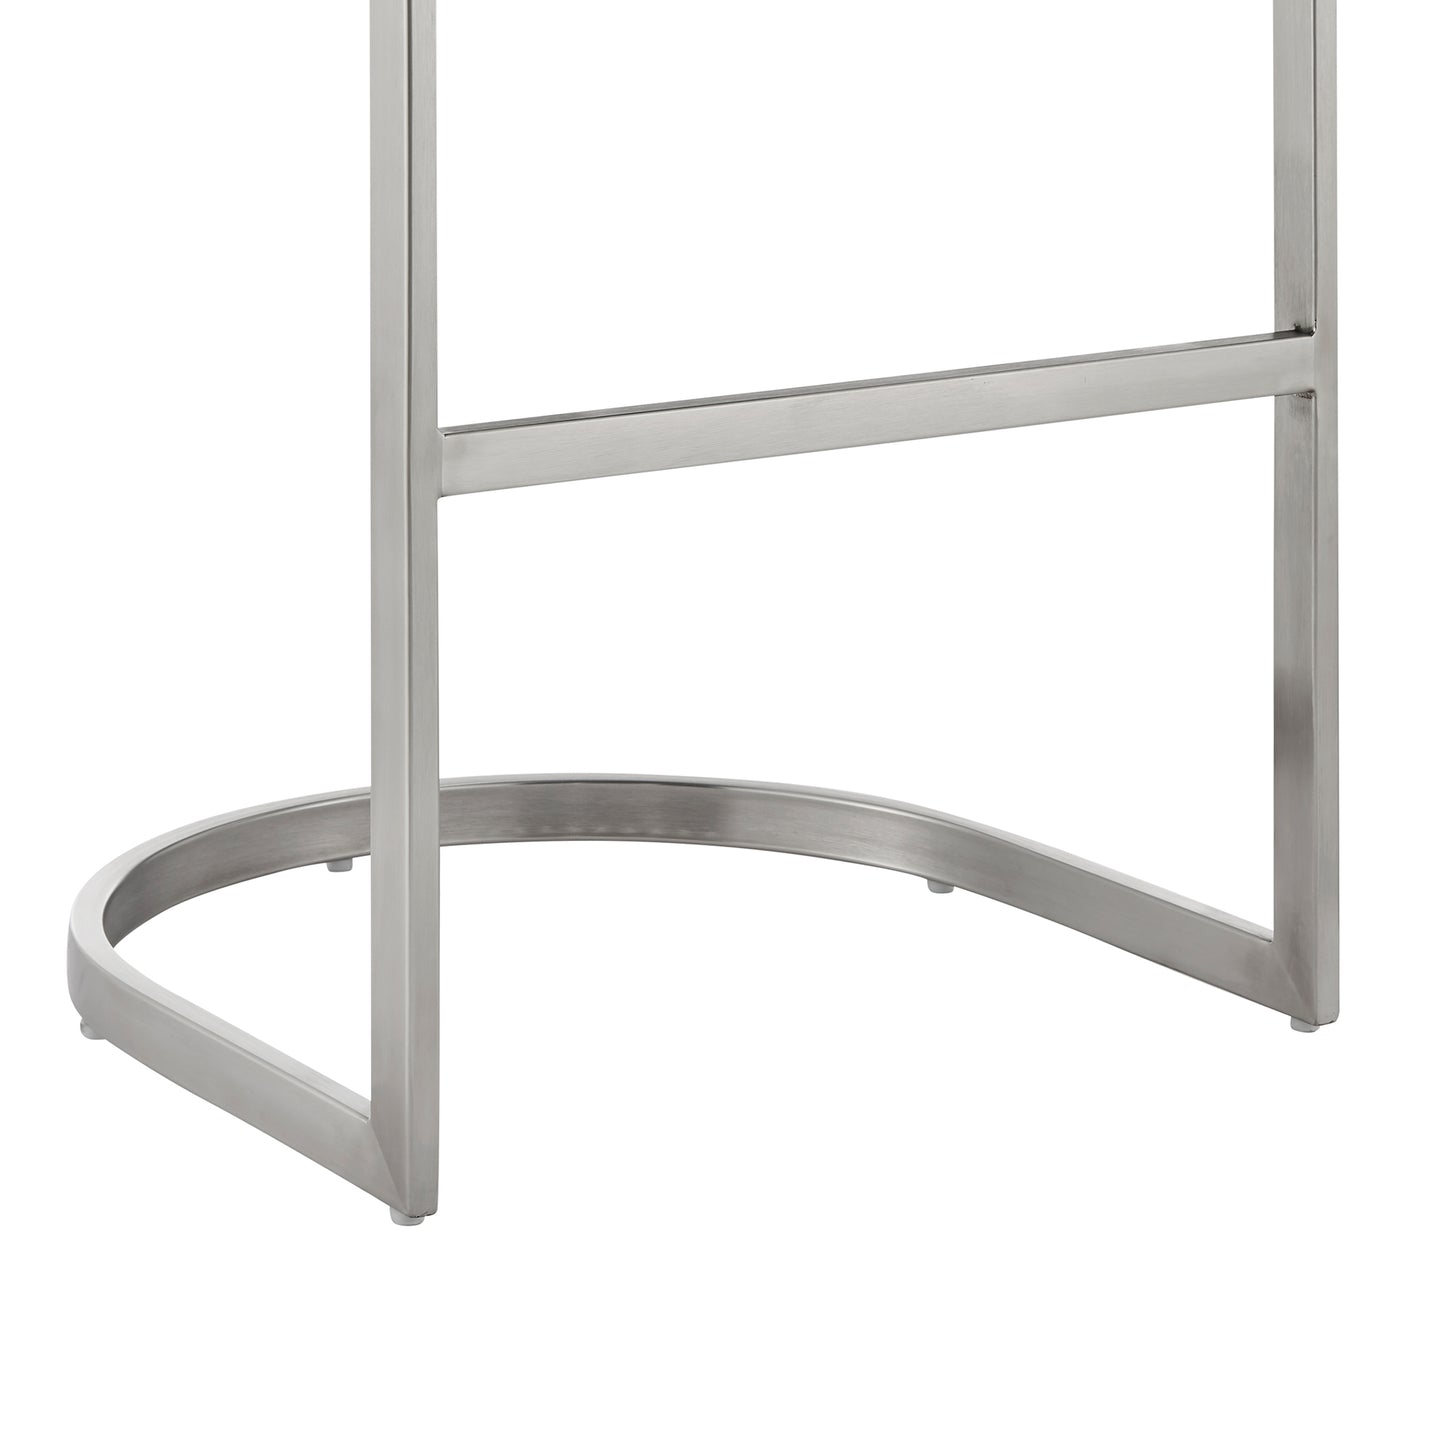 Katherine 30" Bar Stool in Brushed Stainless Steel with White Faux Leather